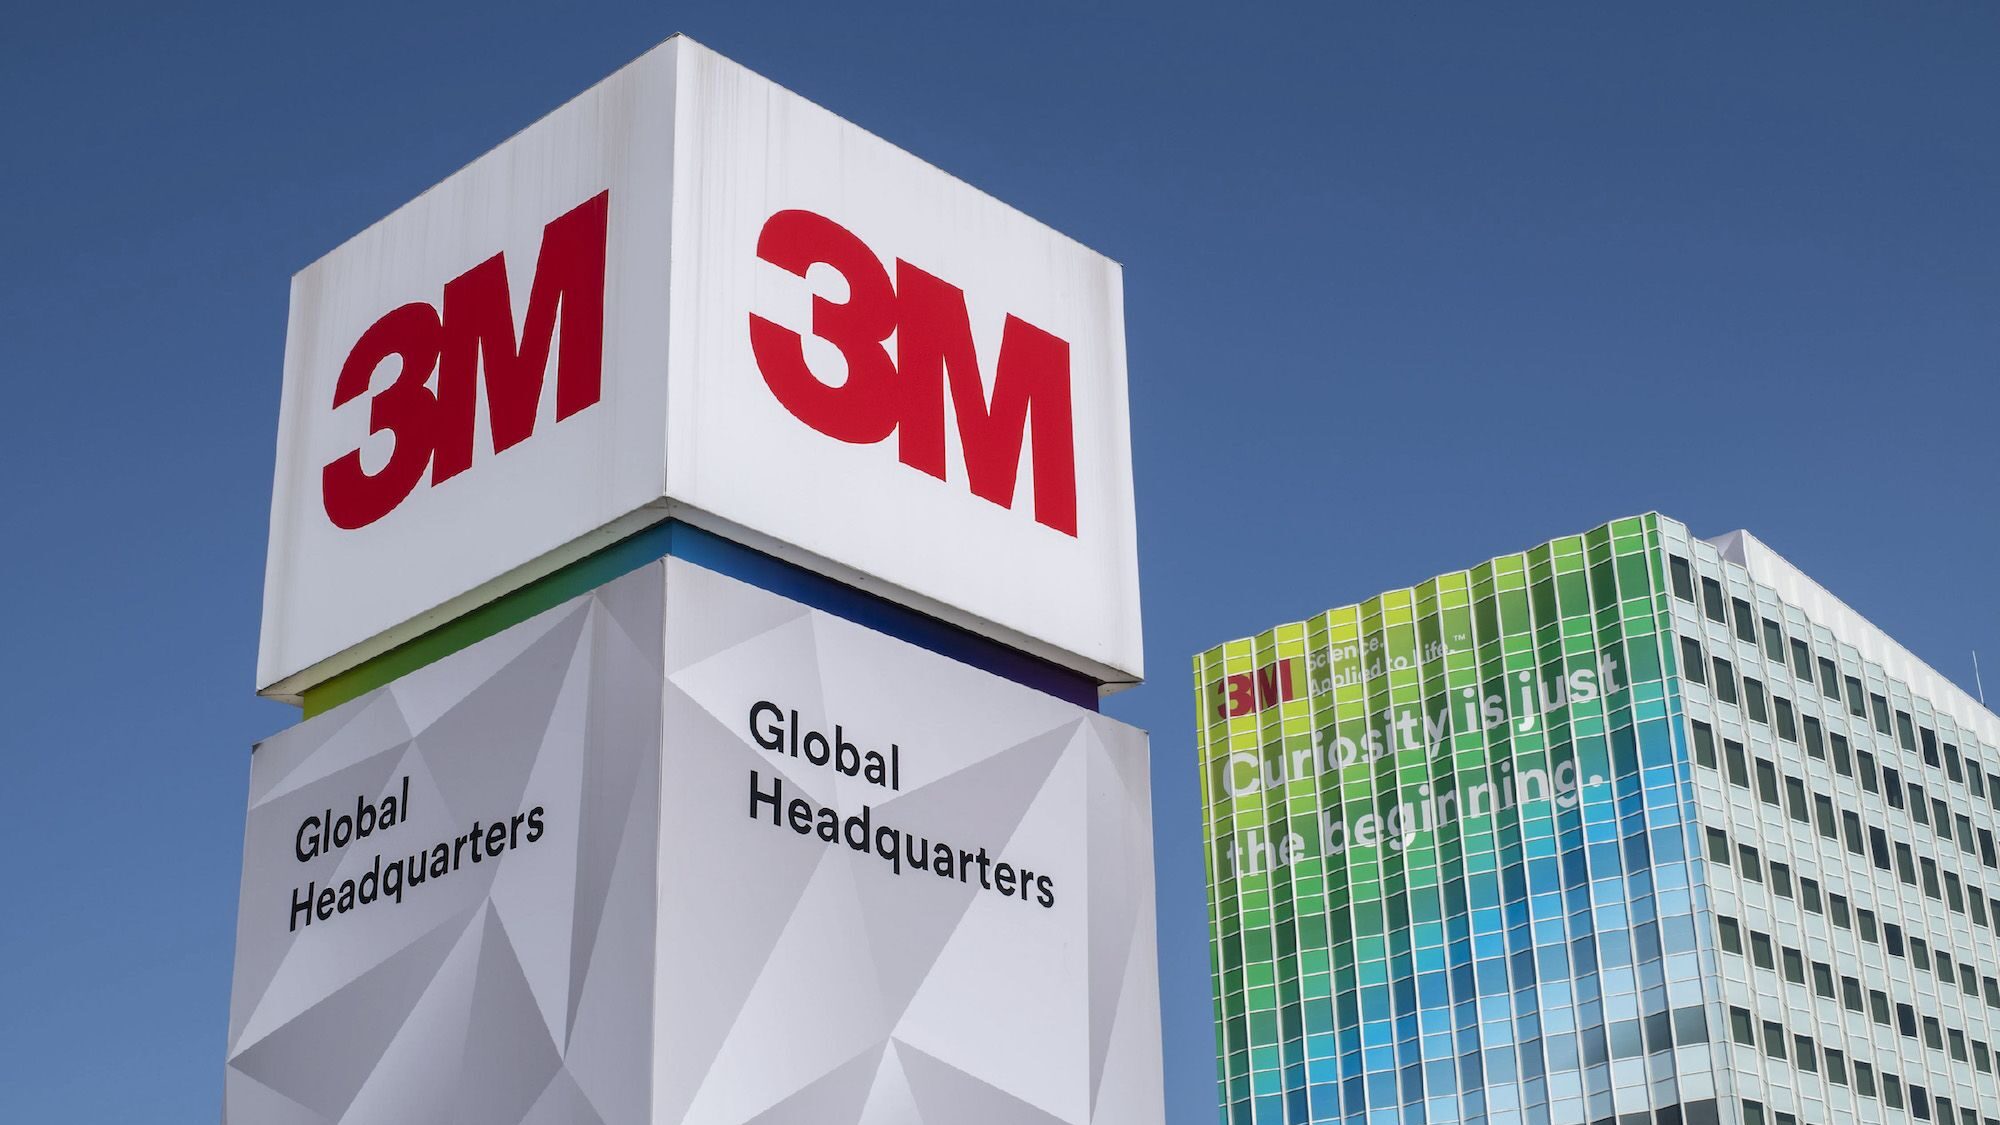 3M has agreed to pay $6 billion after the US military said its earplugs caused hearing loss. Photo ...